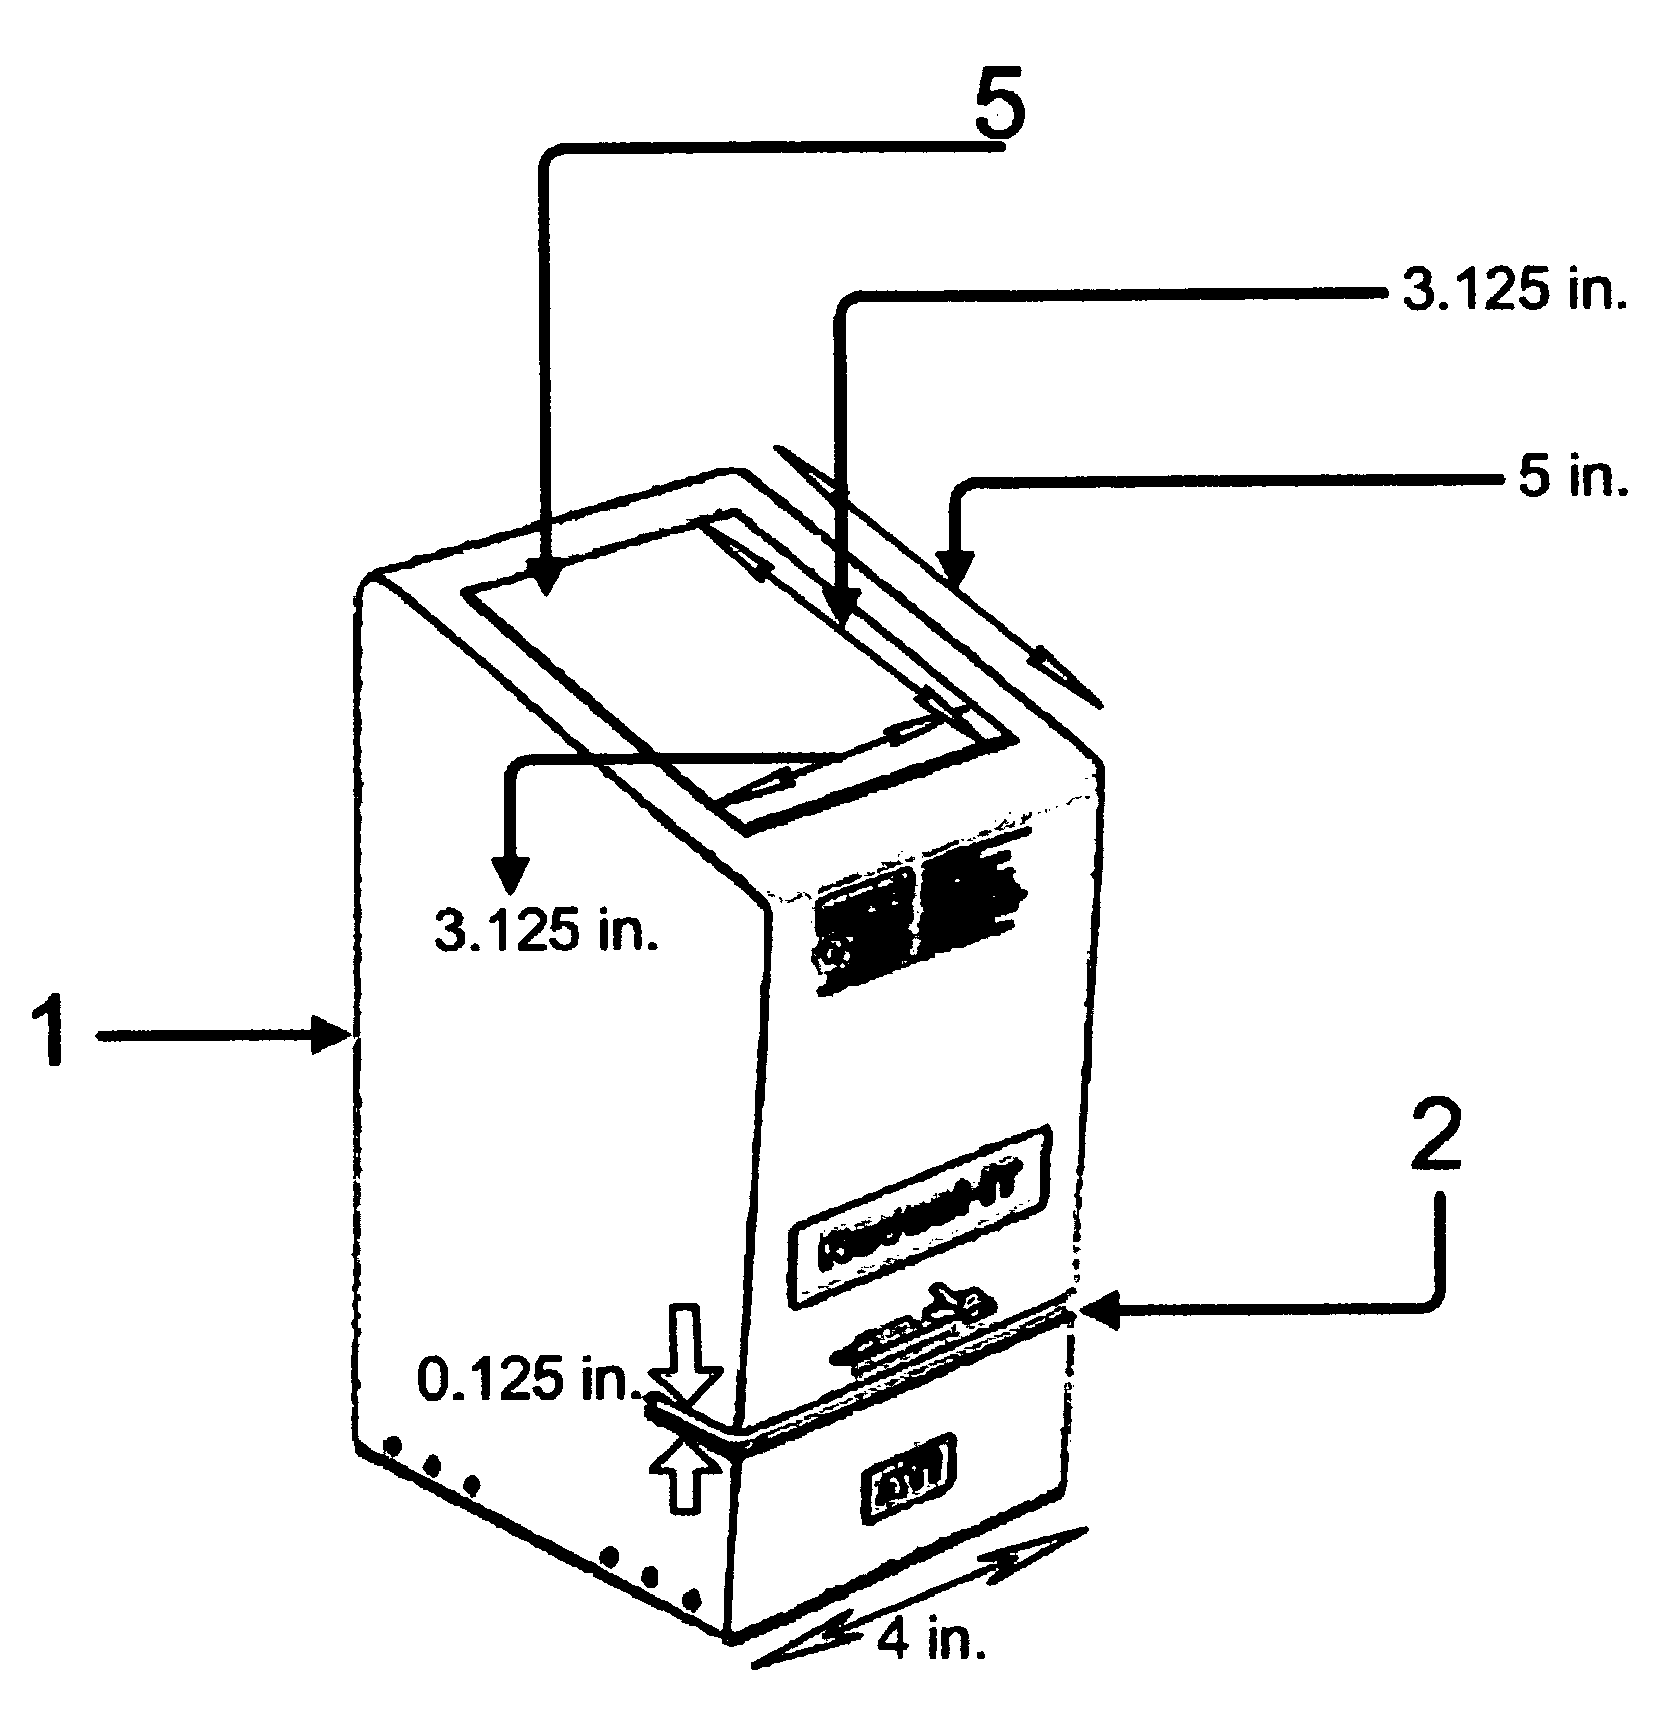 Apparatus for reading standardized personal identification credentials for integration with automated access control systems